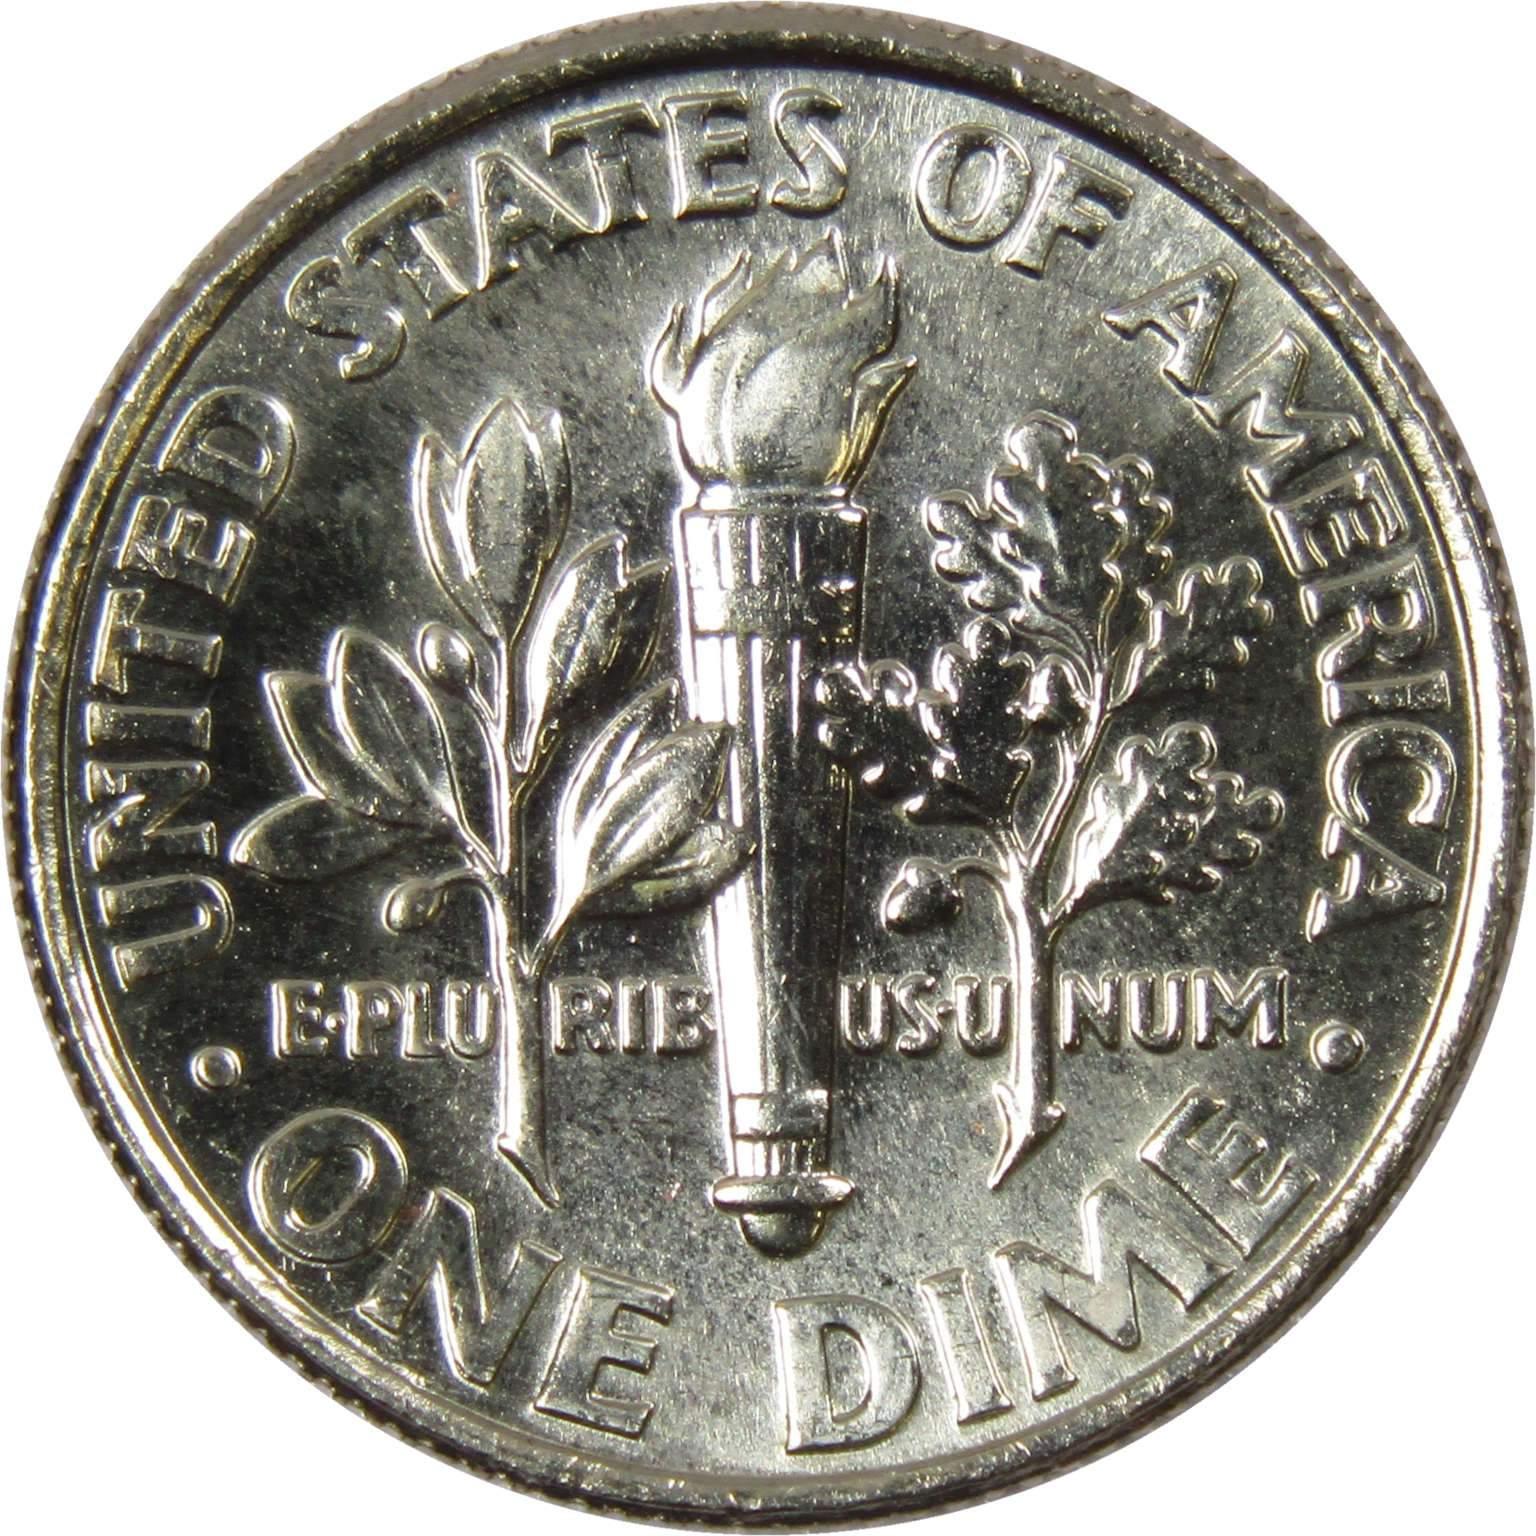 1999 D Roosevelt Dime BU Uncirculated Mint State 10c US Coin Collectible